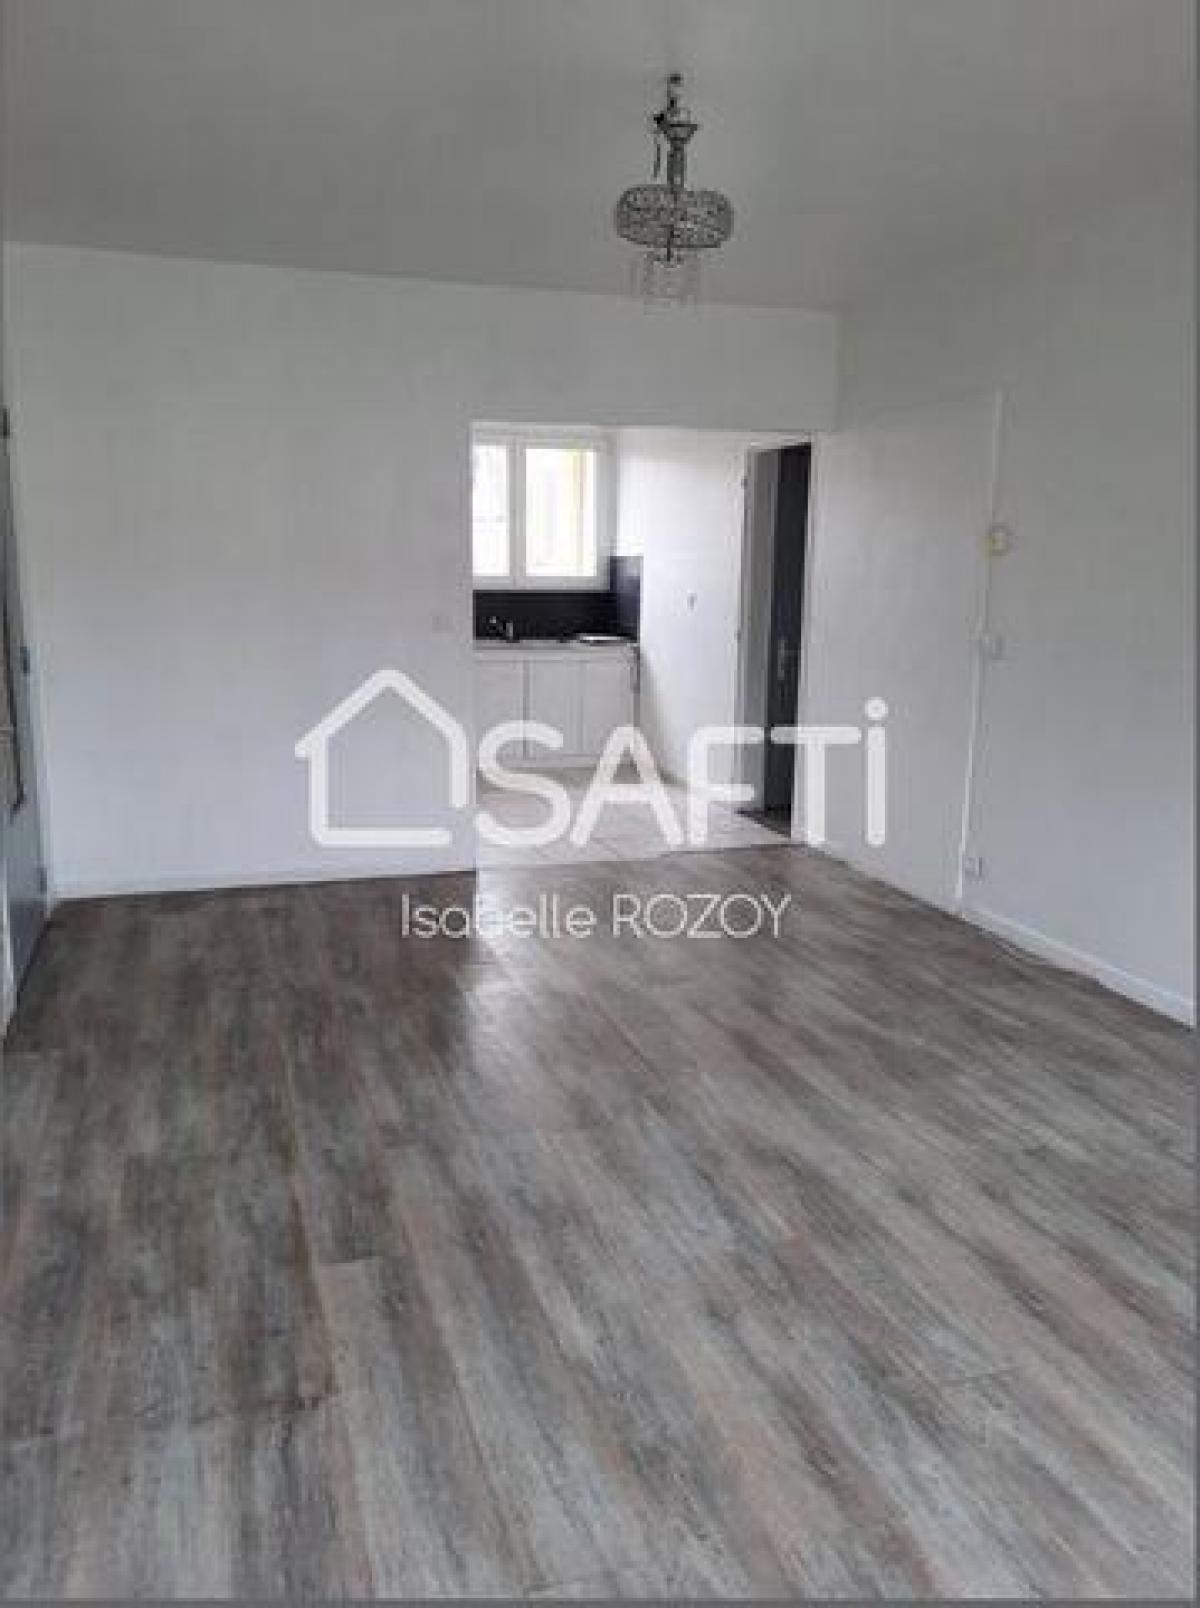 Picture of Apartment For Sale in Joeuf, Lorraine, France